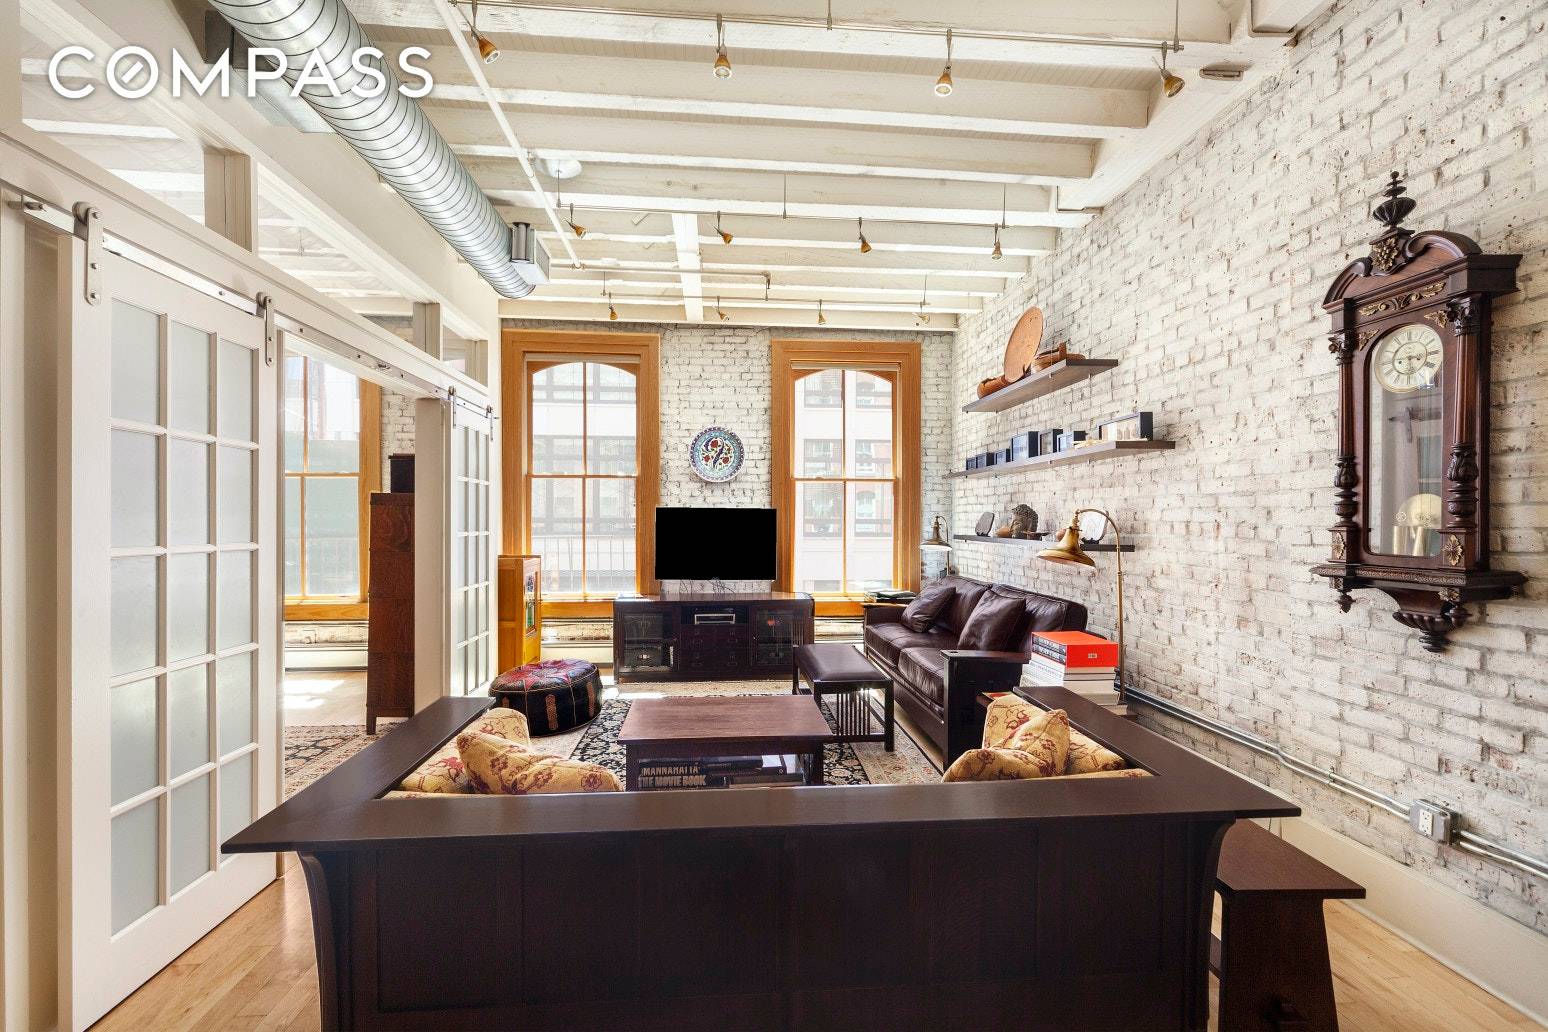 Located in prime Tribeca, this 3 bedroom dream loft is now available.